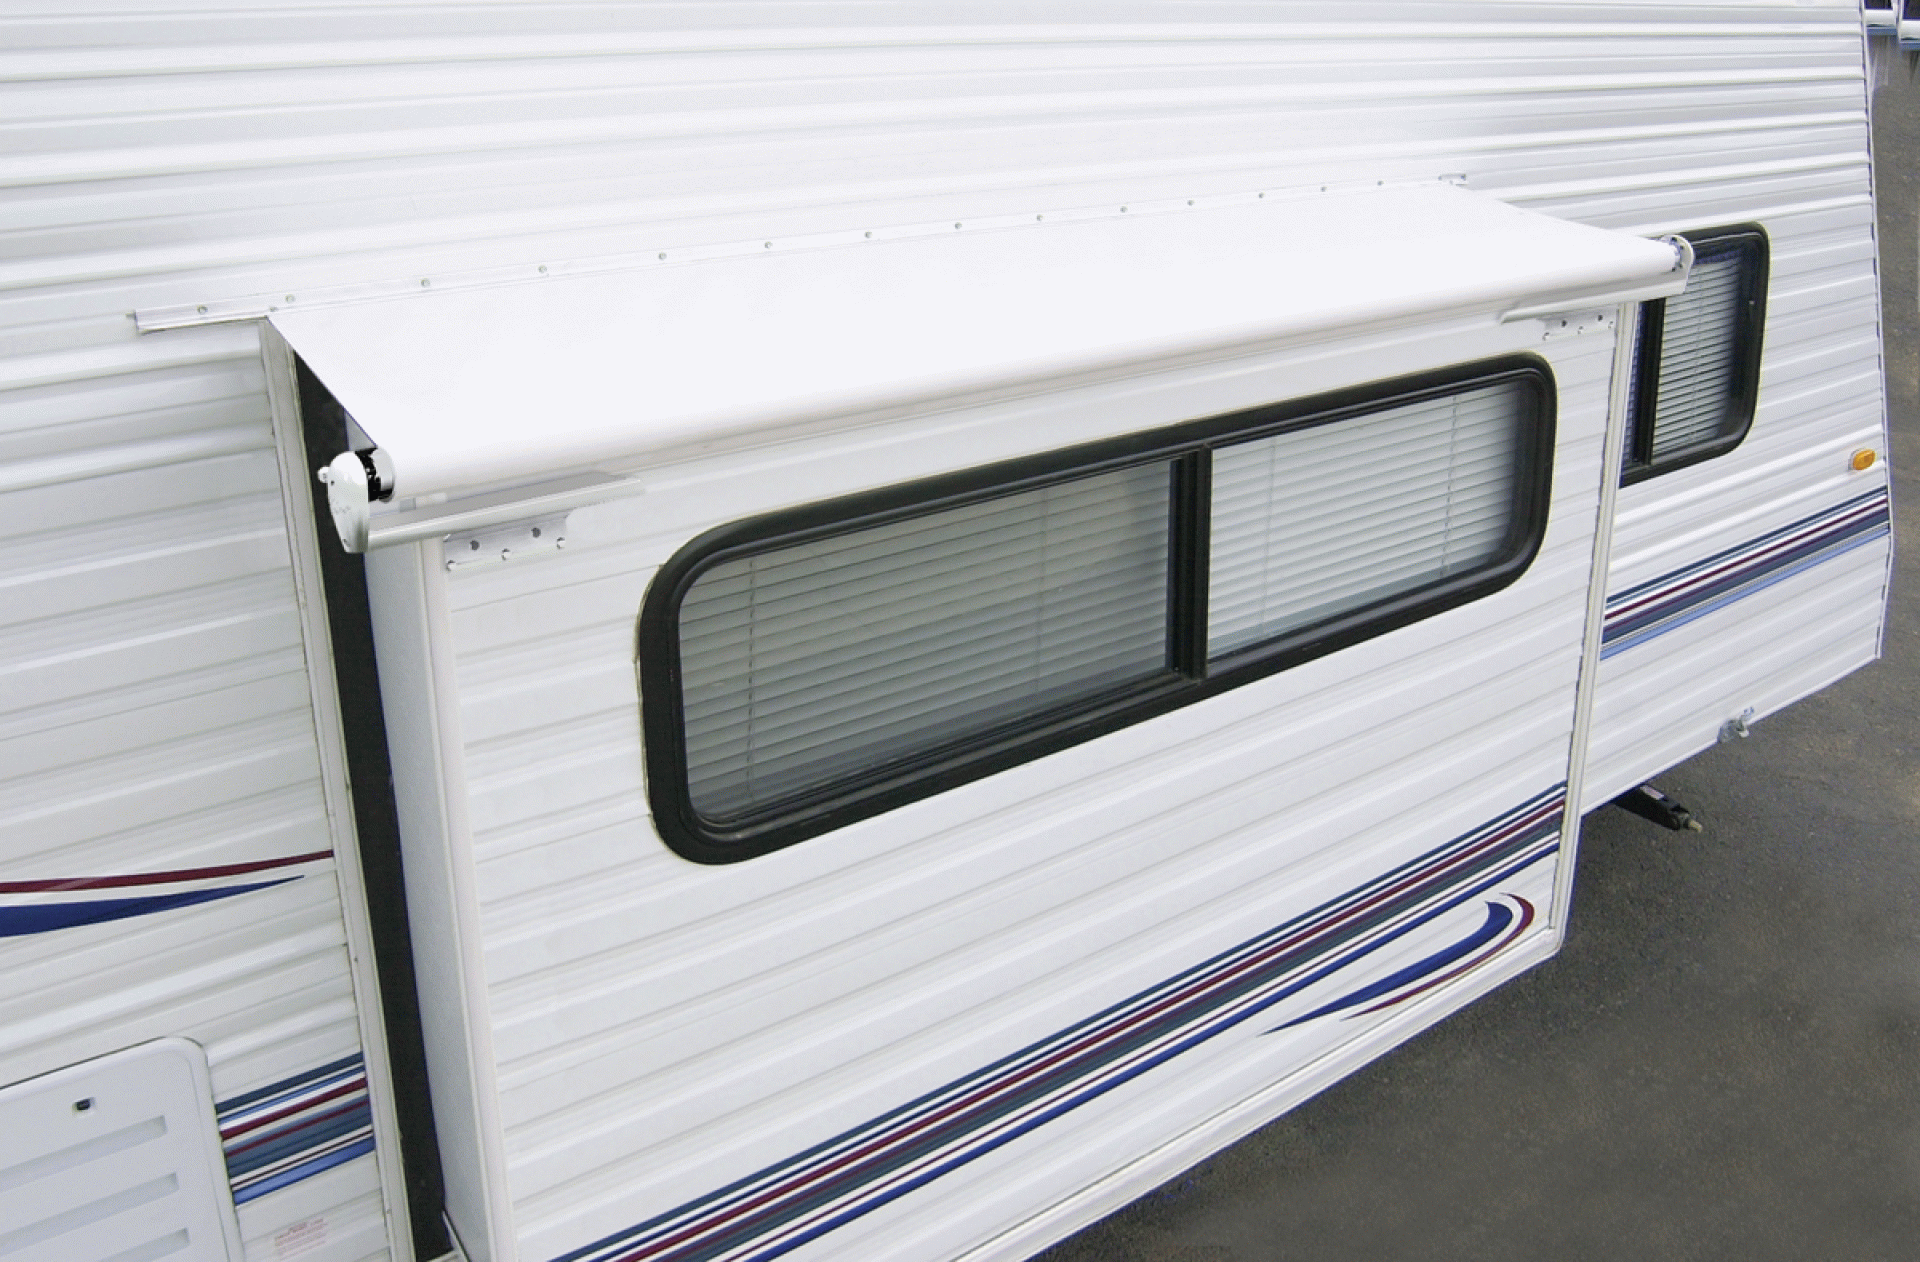 CAREFREE OF COLORADO | LH1610042 | SLIDEOUT COVER AWNING 154" - 161.9" ROOF RANGE WHITE VINYL